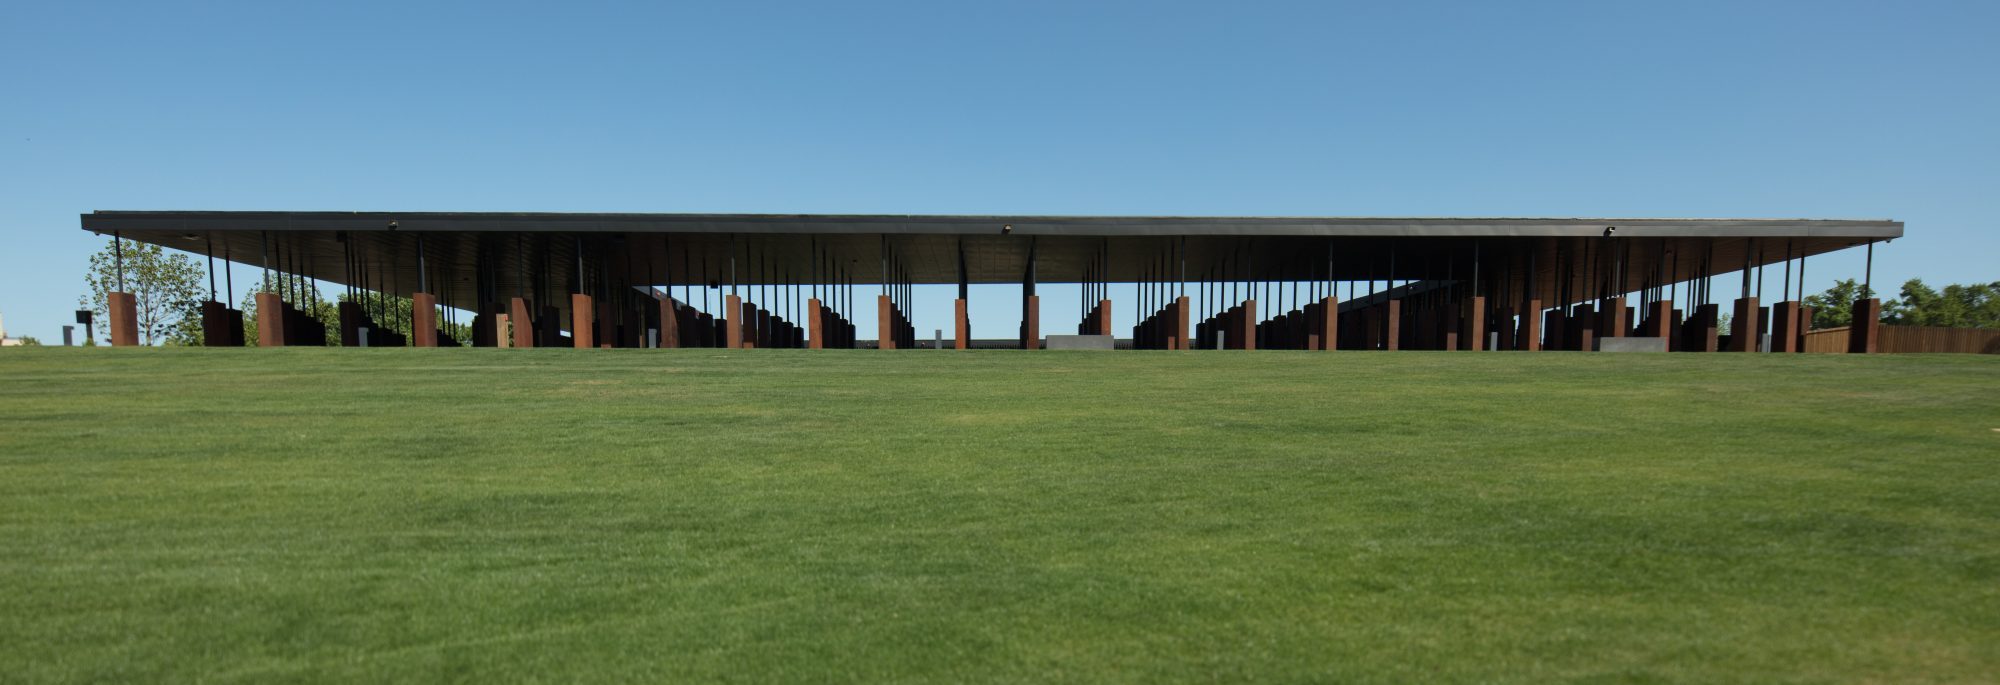 wide exterior shot of the national memorial for peace and justice